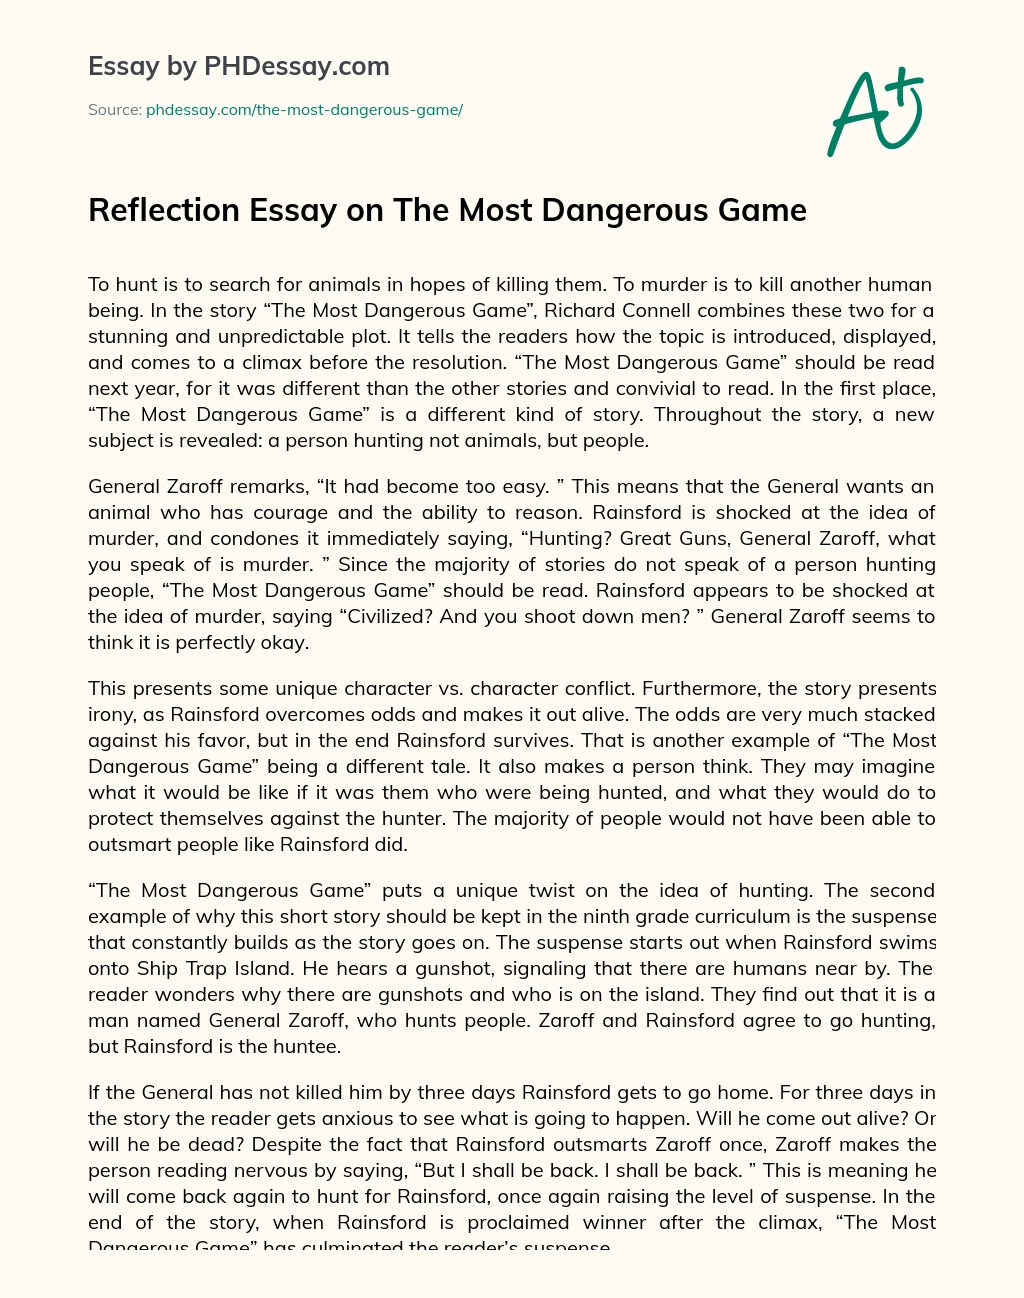 Reflection Essay on The Most Dangerous Game essay